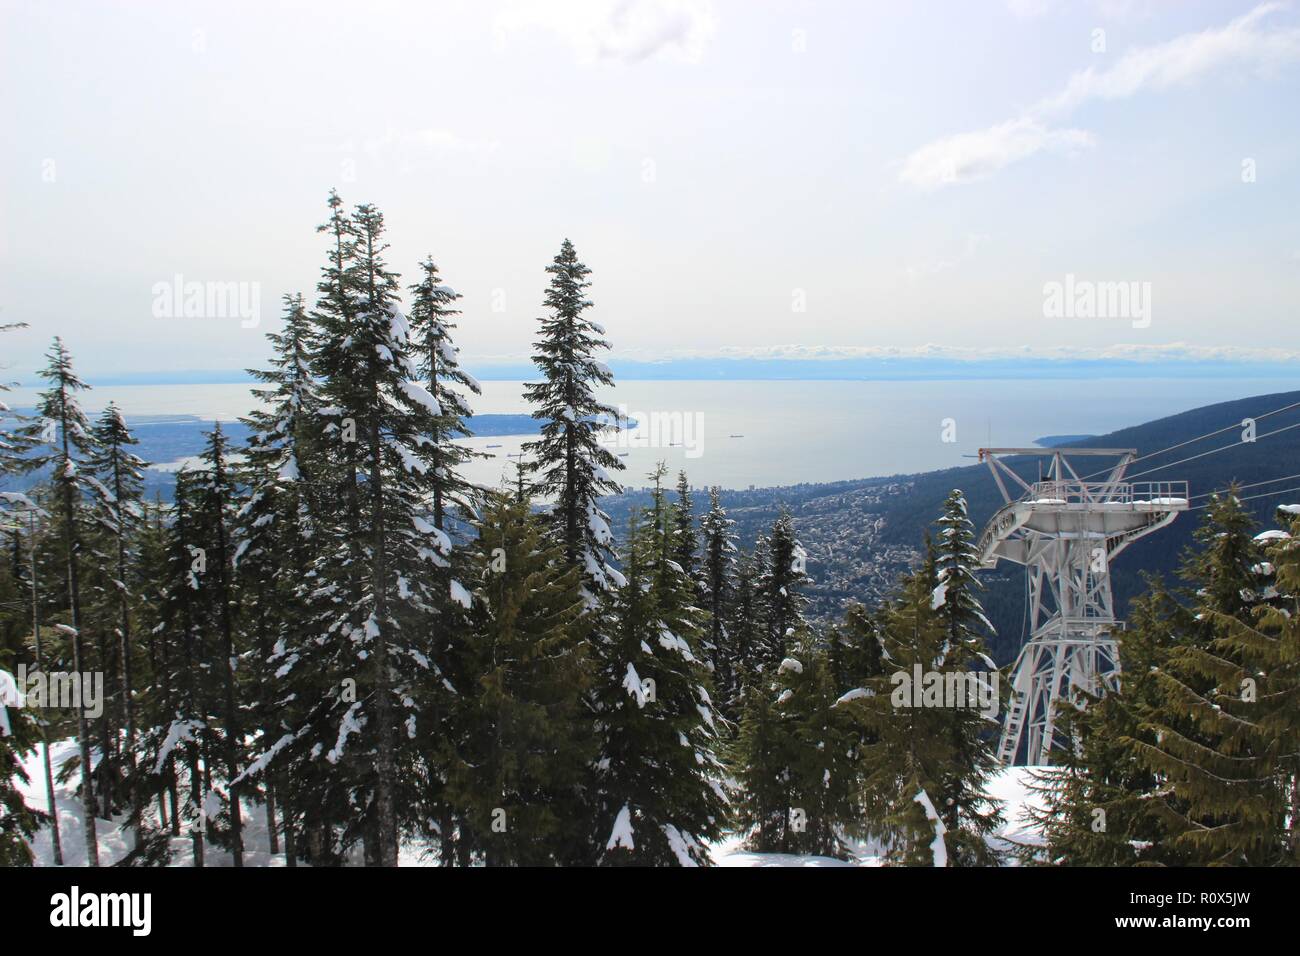 Christmas trees (Evergreen trees) Covered with Snow, Grouse Mountain, Vancouver, Canada Stock Photo